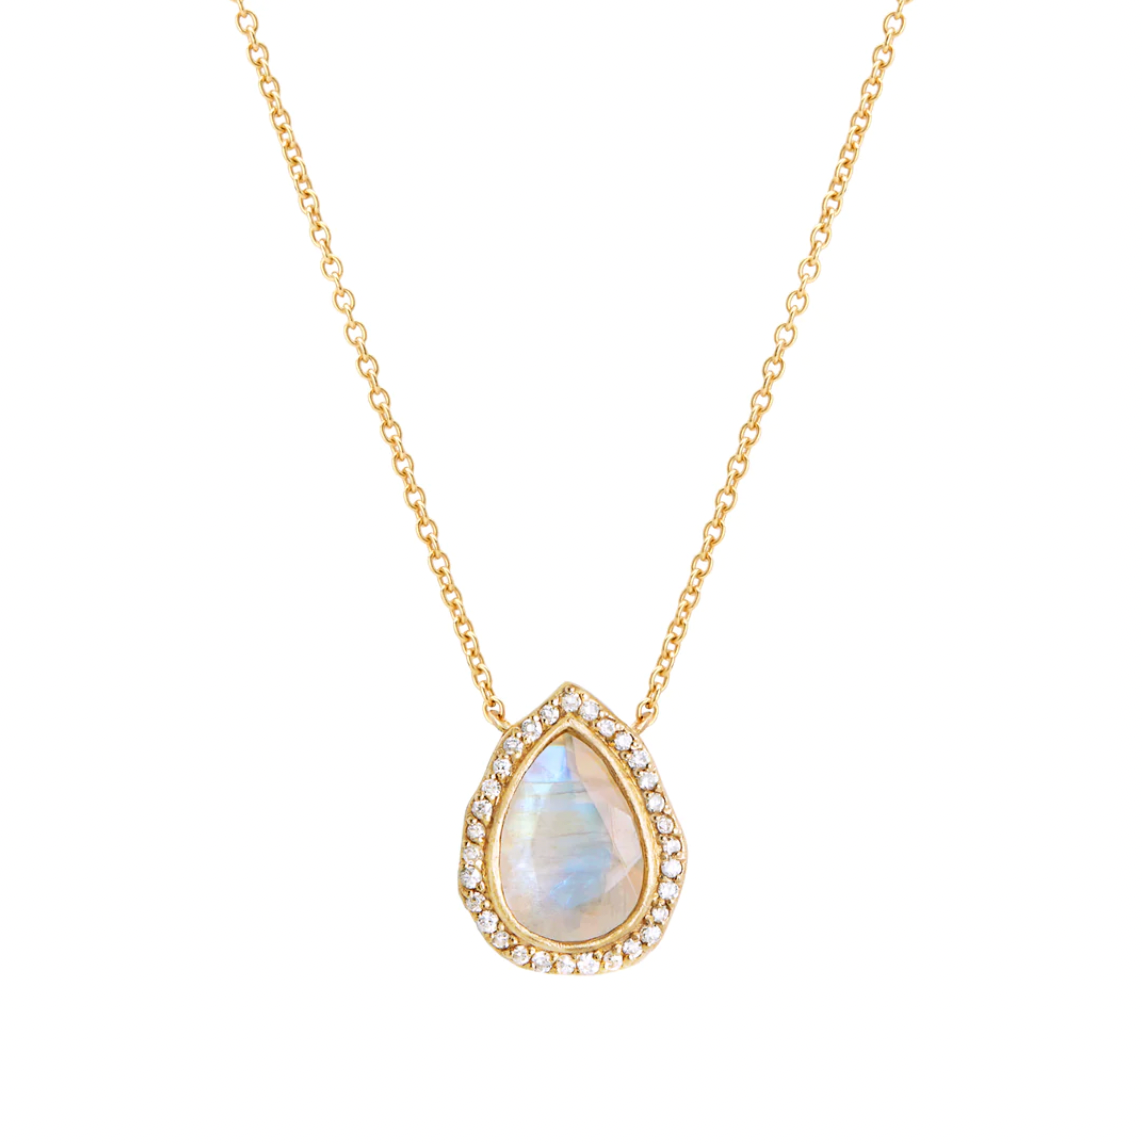 Amer New York + The Gia Moonstone Necklace